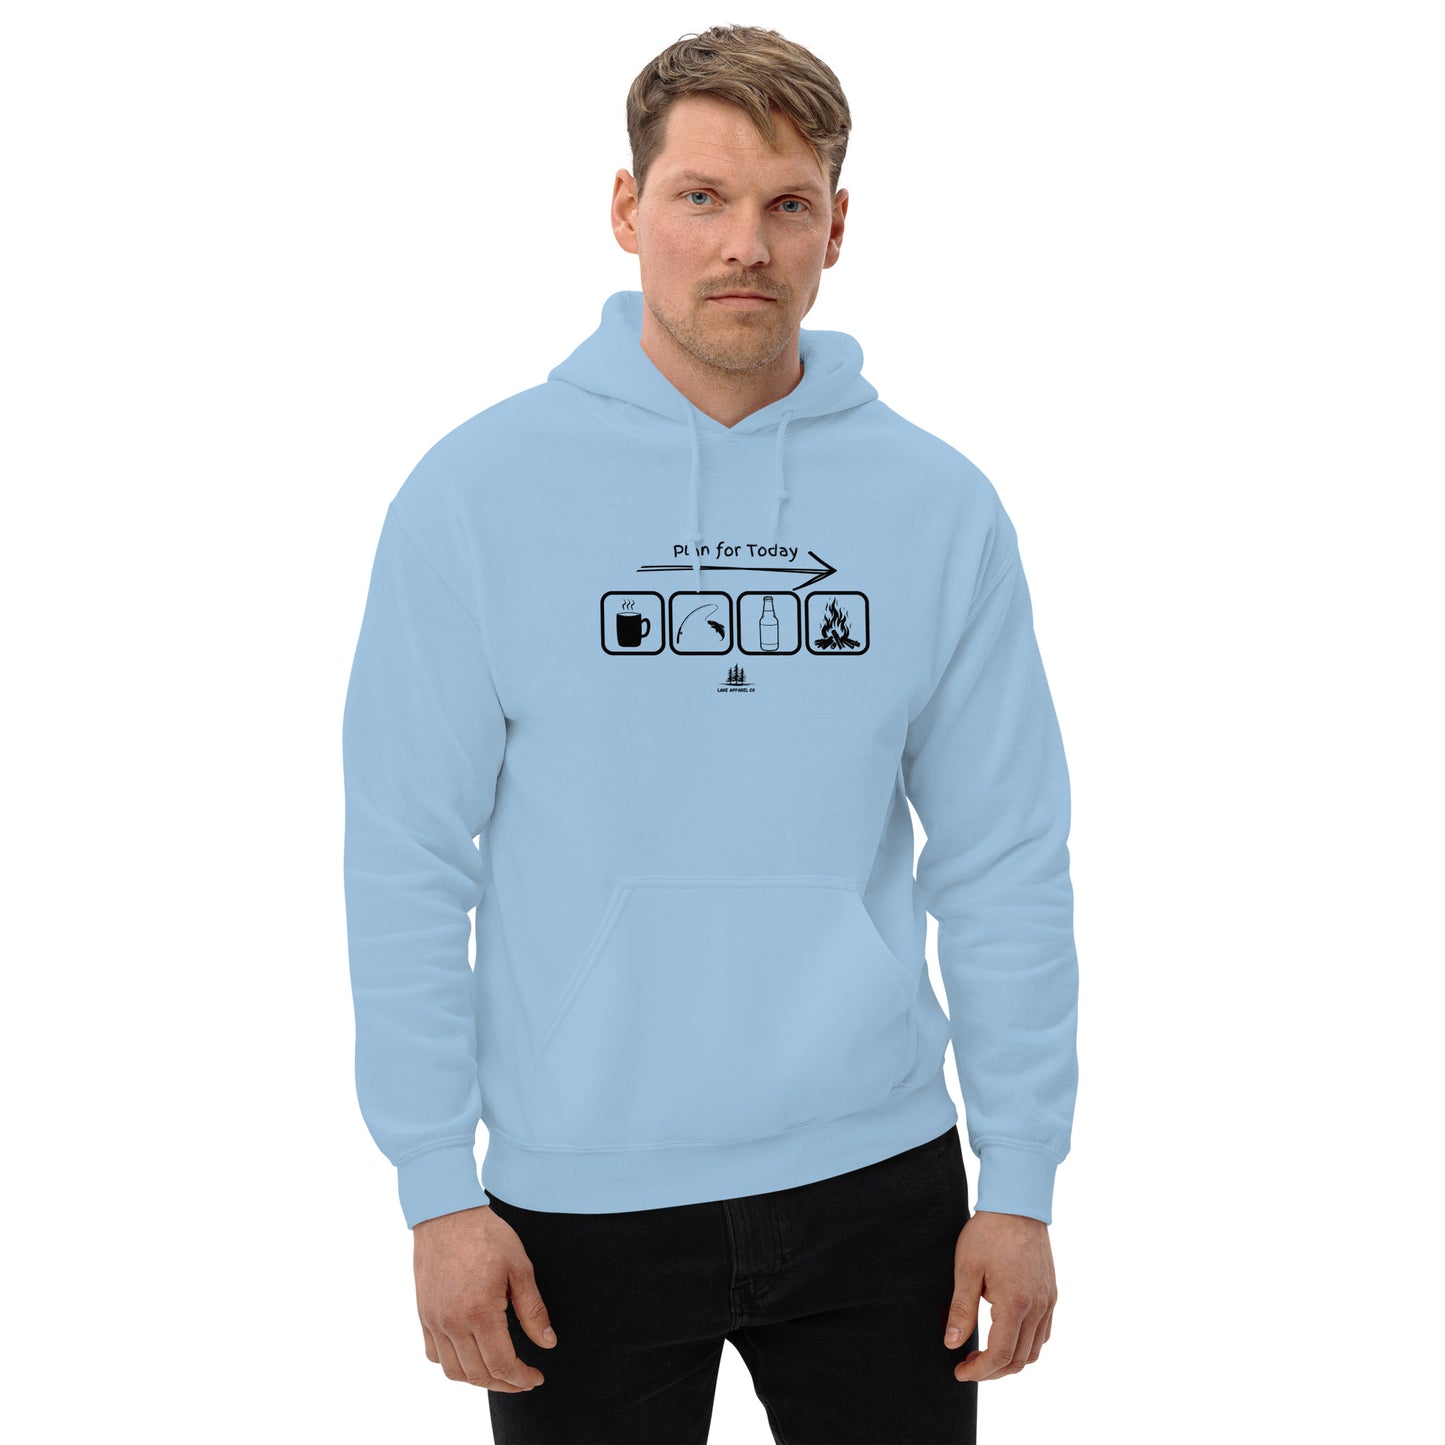 Plan for Today - Unisex Hoodie - Fishing